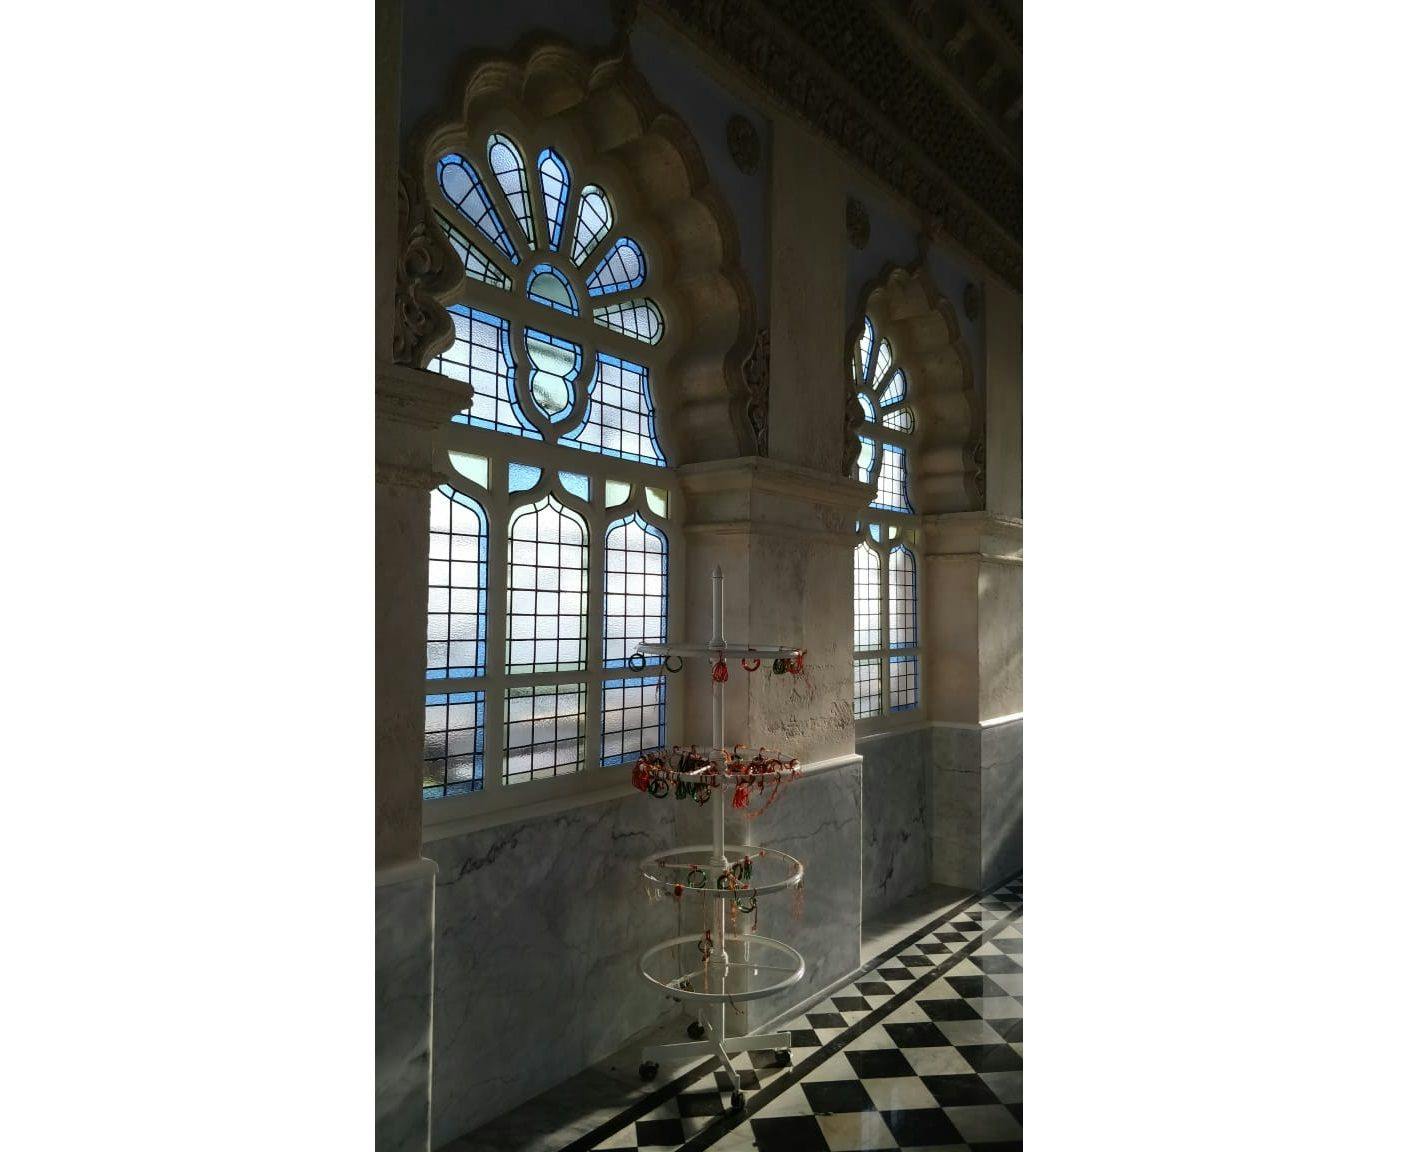 The interior of the Dargah